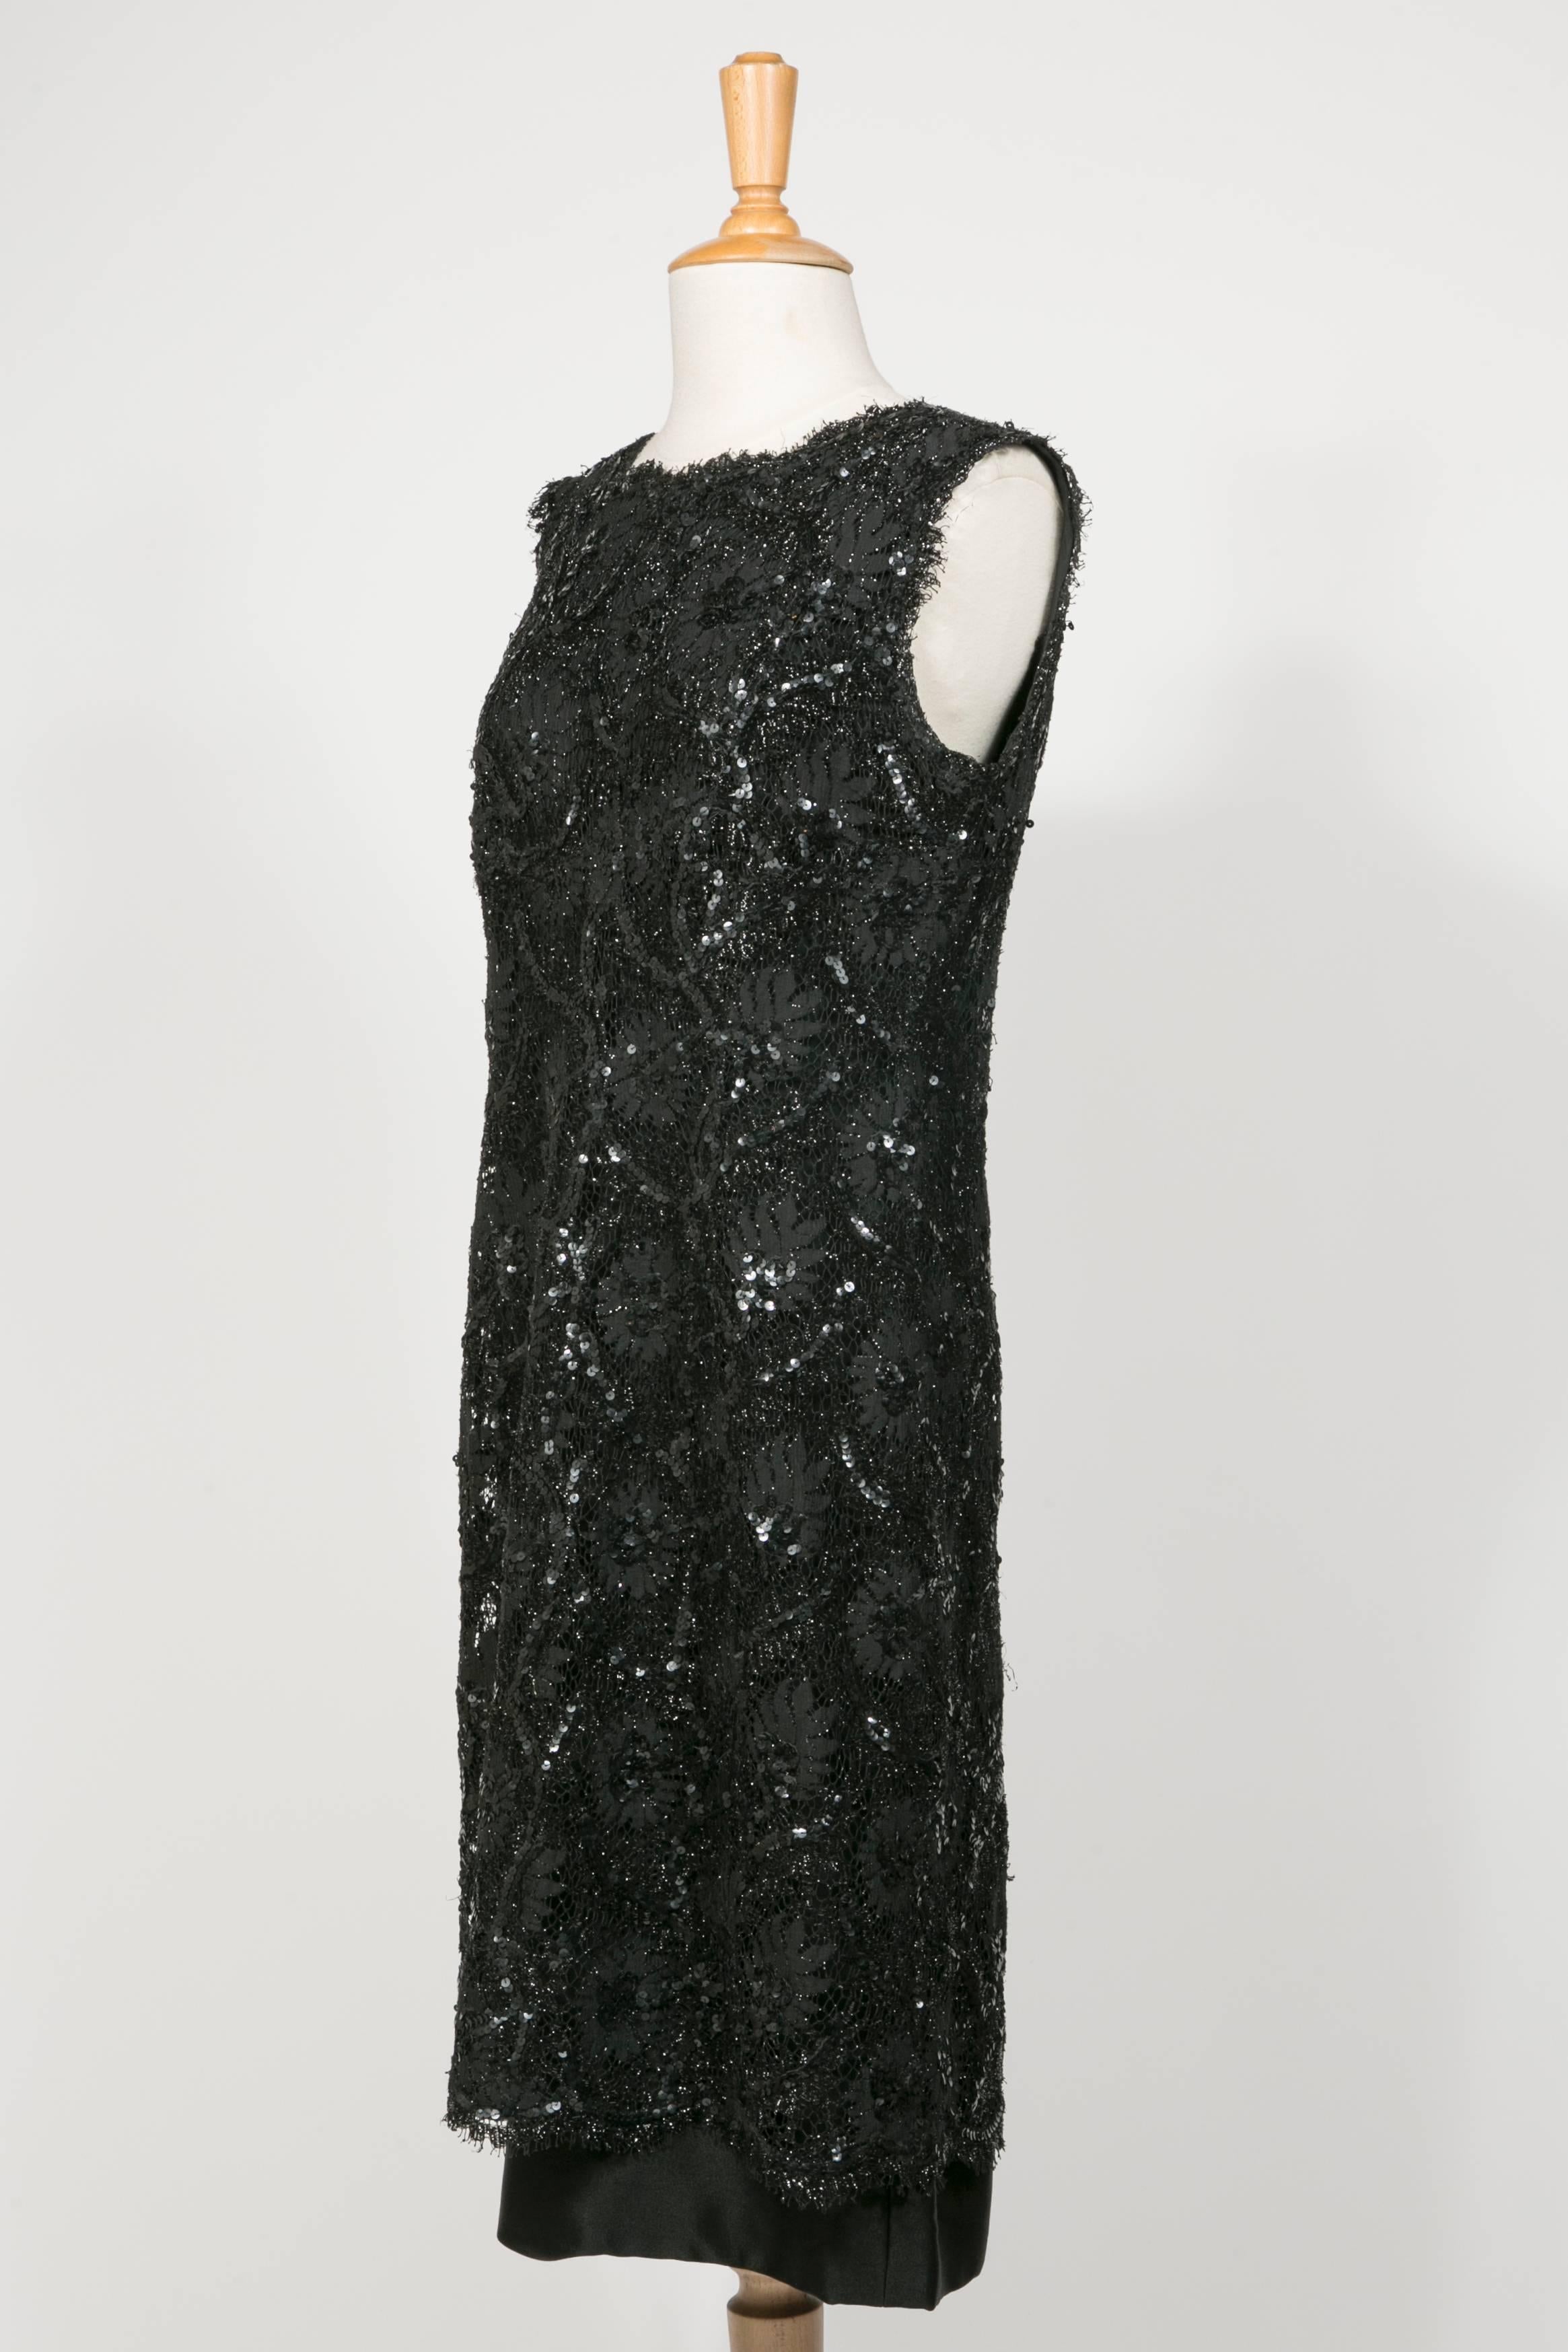 1960 's Balenciaga Haute -Couture Blake Lace Sequins Cocktail Dress

This stunning sleeveless dress is typical Cristobal Balenciaga style with 
the 